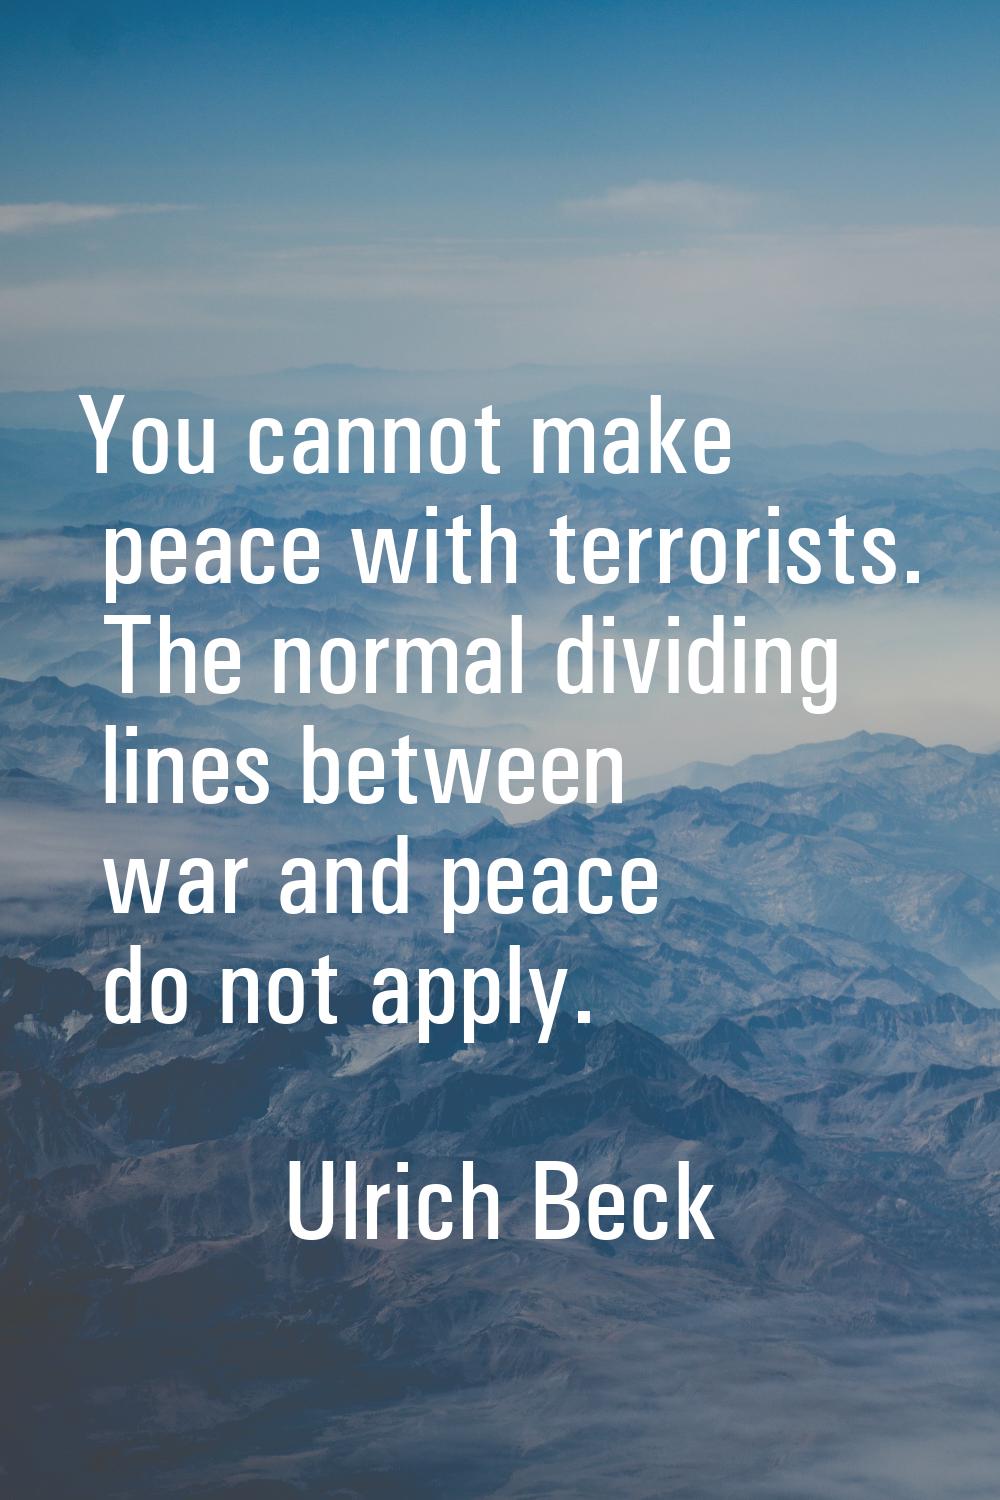 You cannot make peace with terrorists. The normal dividing lines between war and peace do not apply